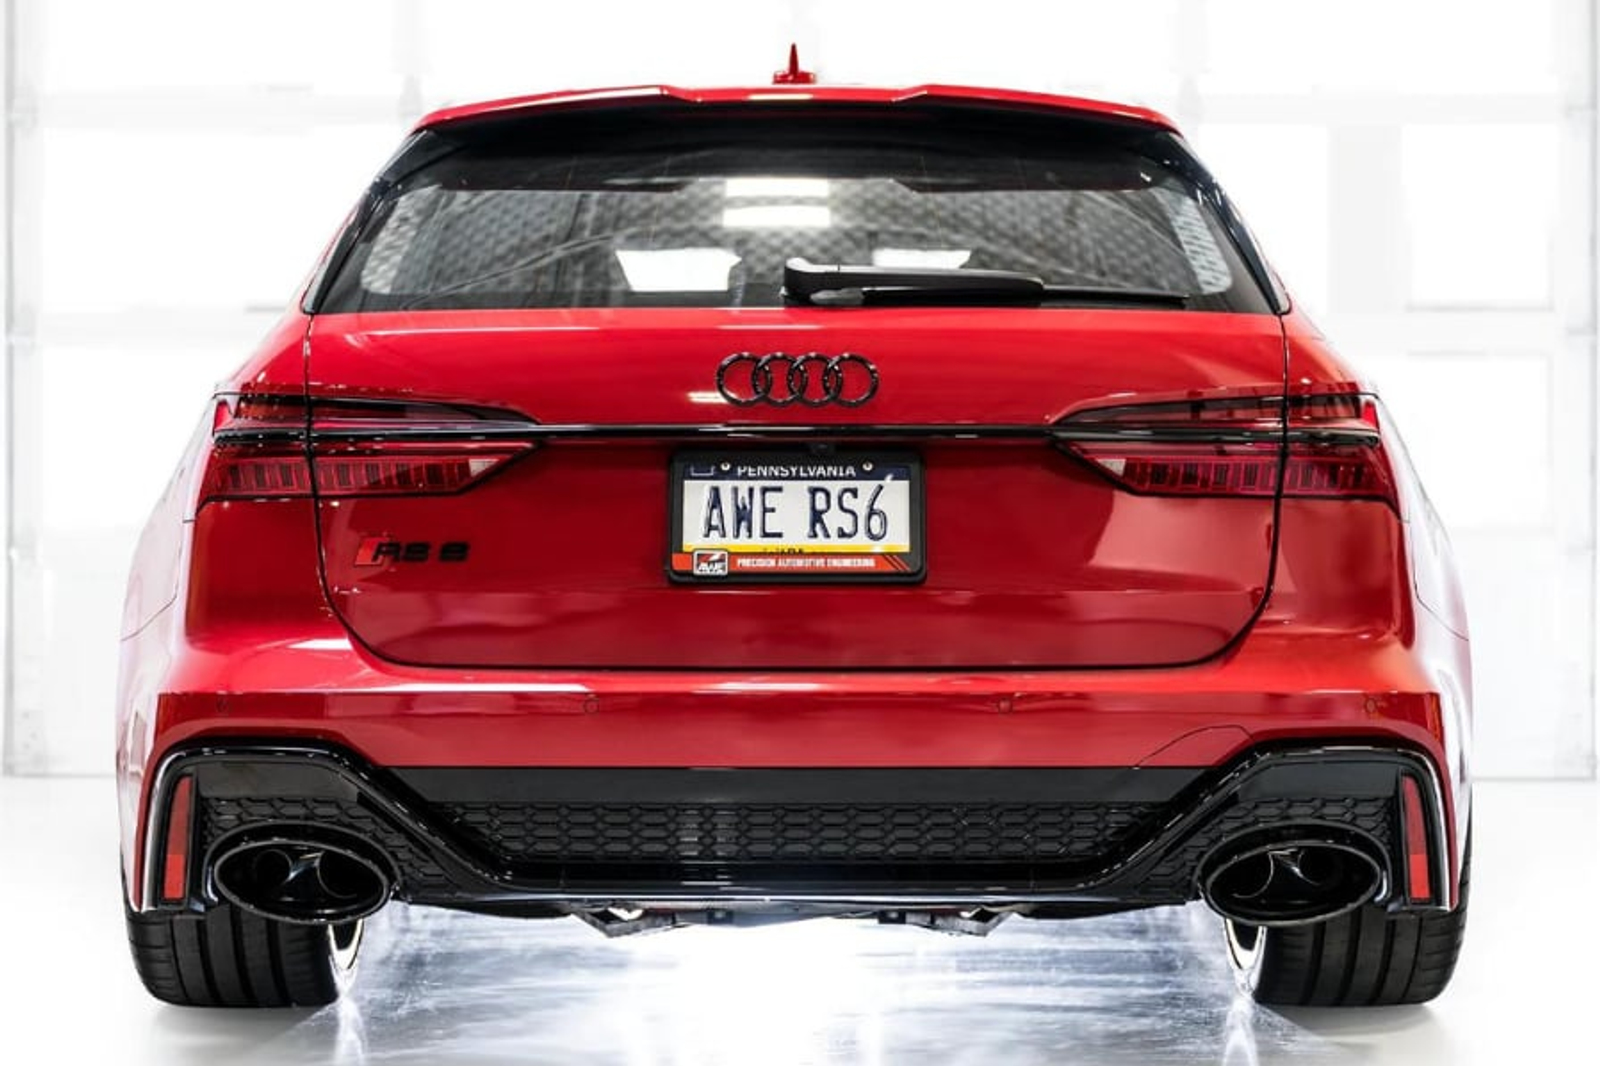 video, awe gives audi rs6 and rs7 menacing exhaust note